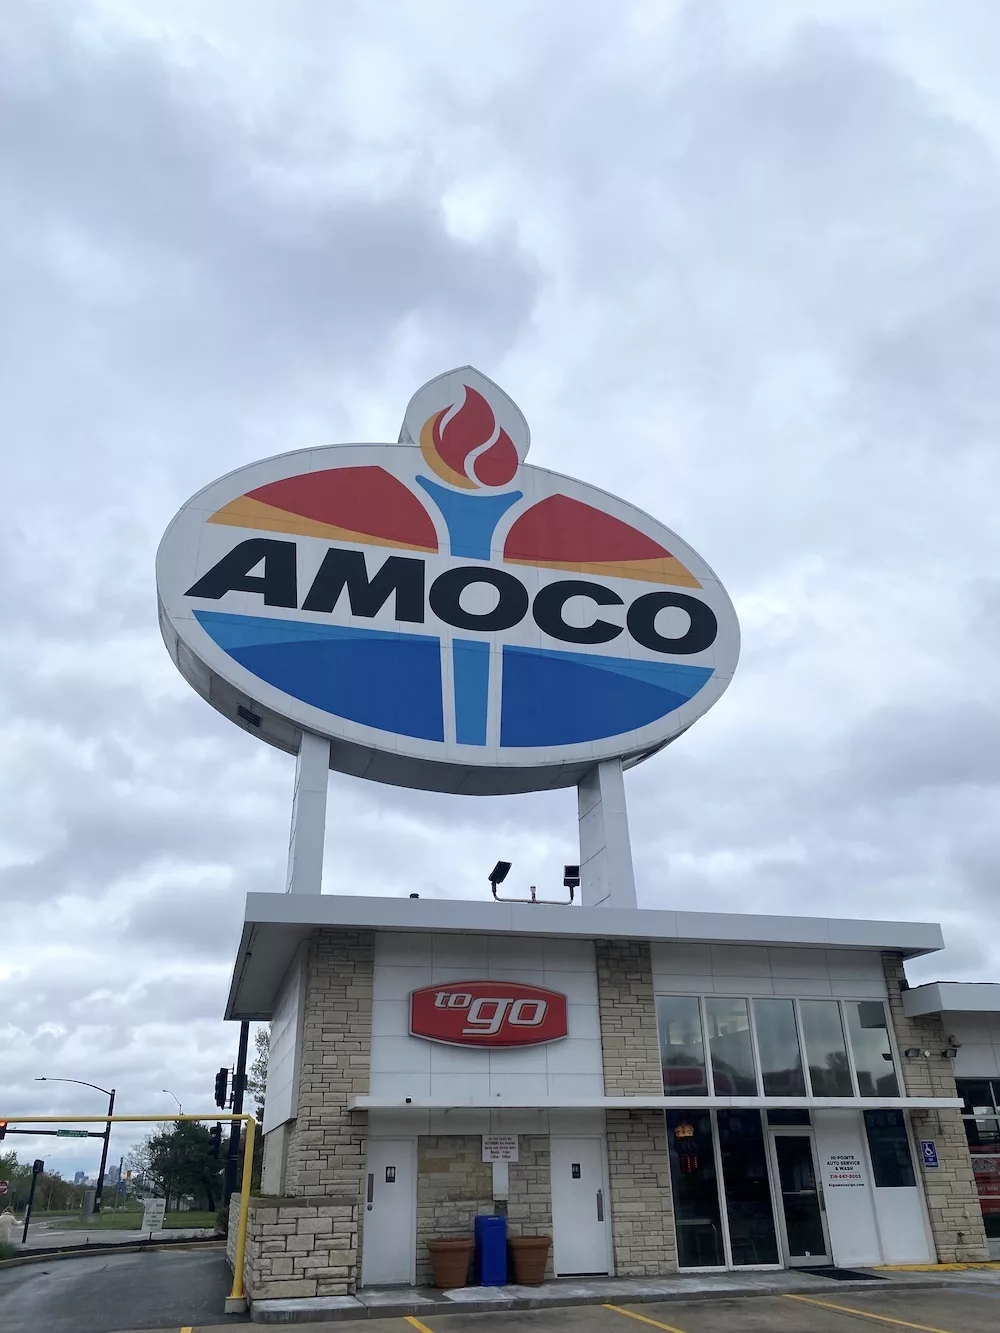 World's Largest AMOCO Sign in St. Louis, Missouri